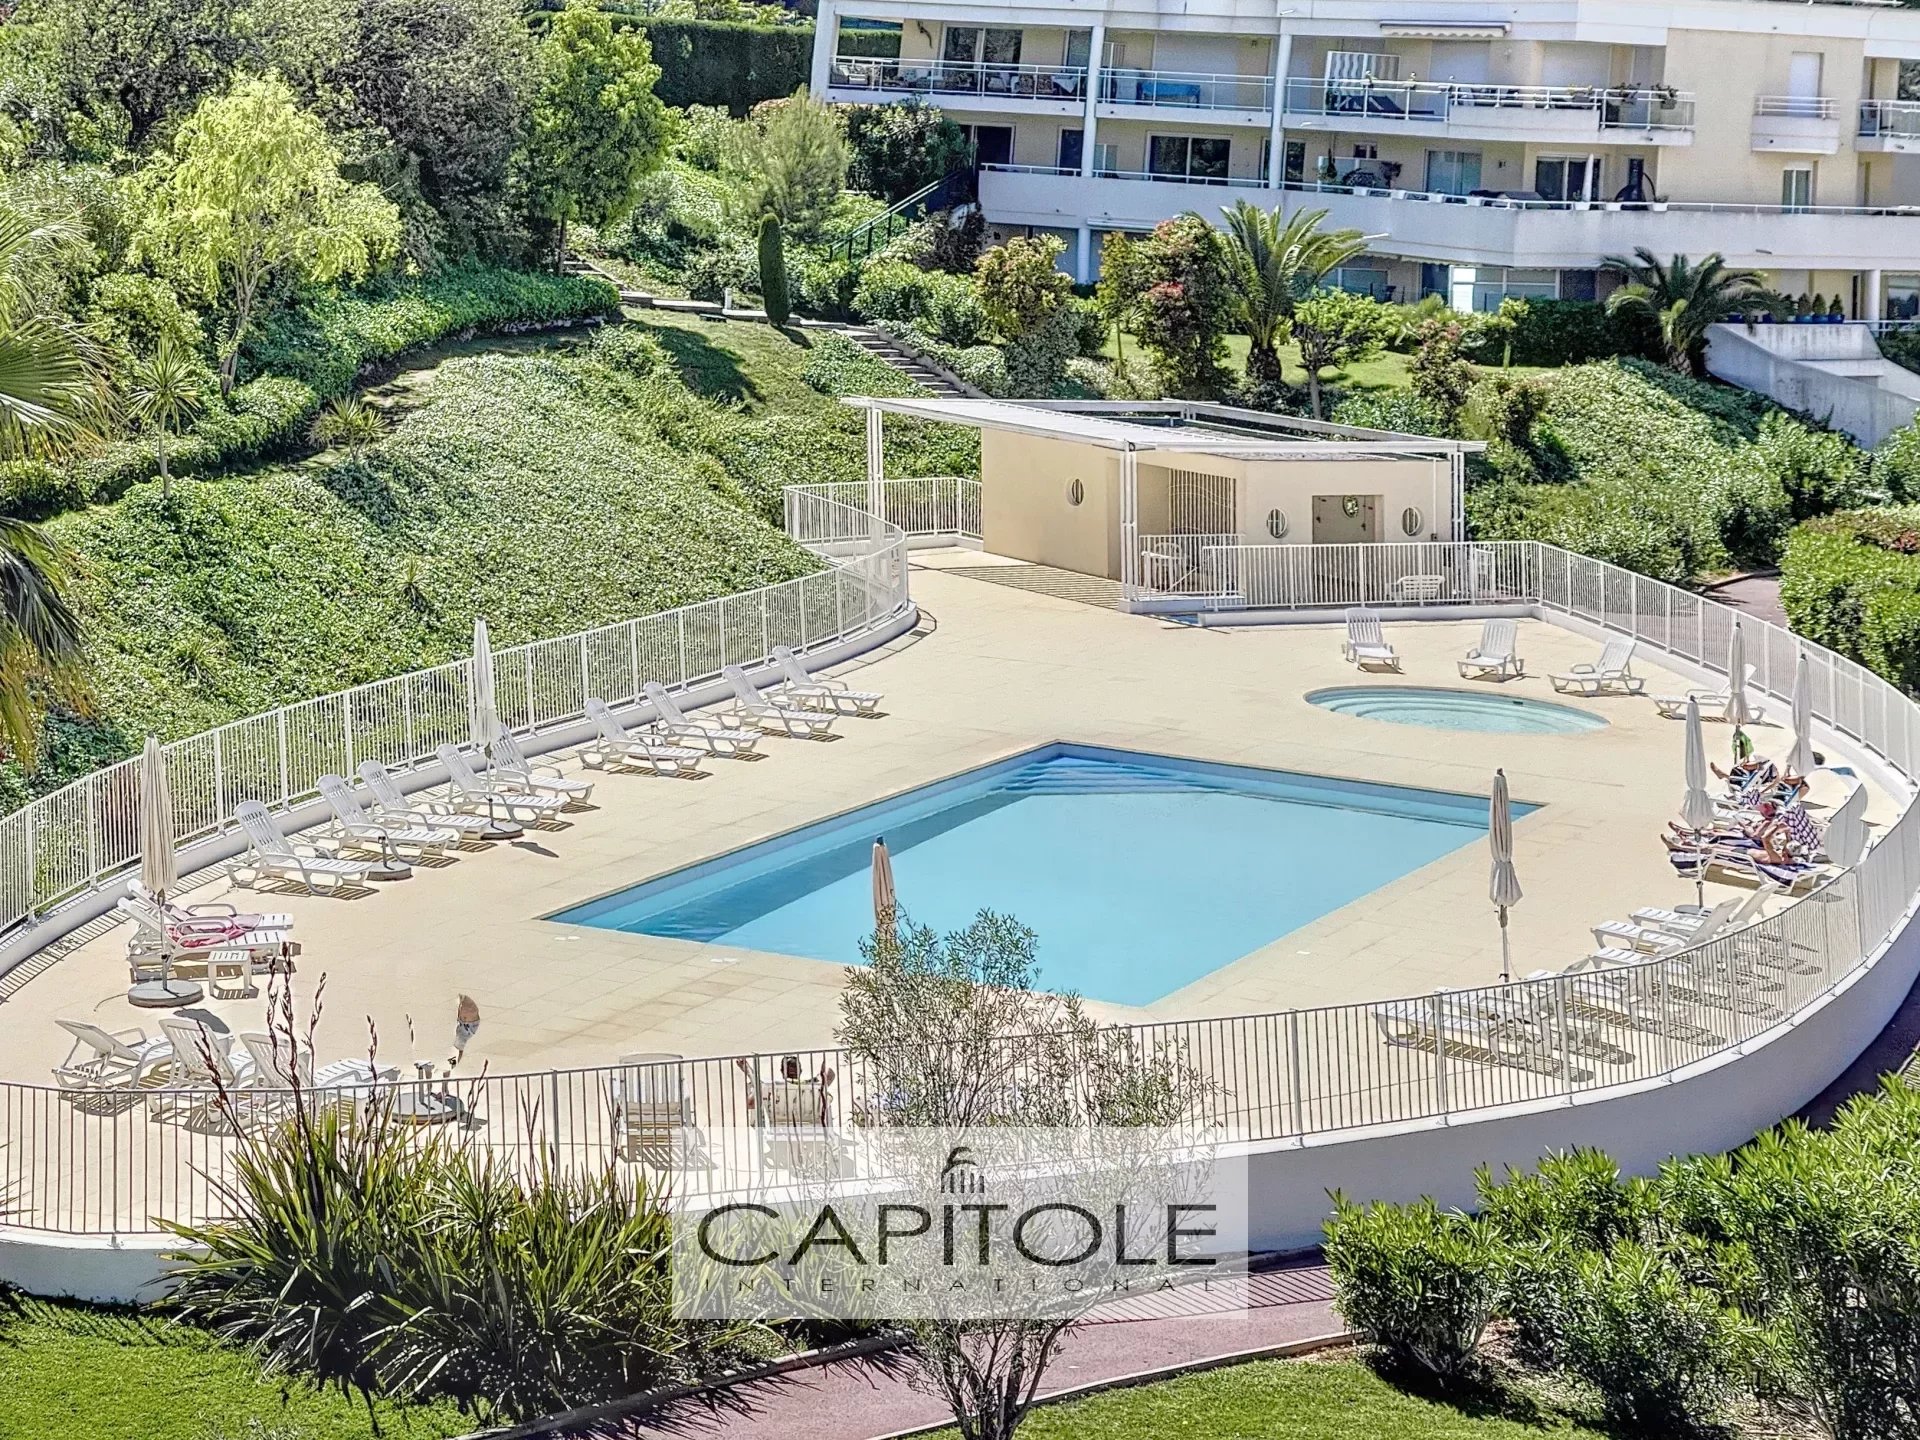 Antibes  for sale  top floor apartment  of 82m² with corner terrasse of 70m²